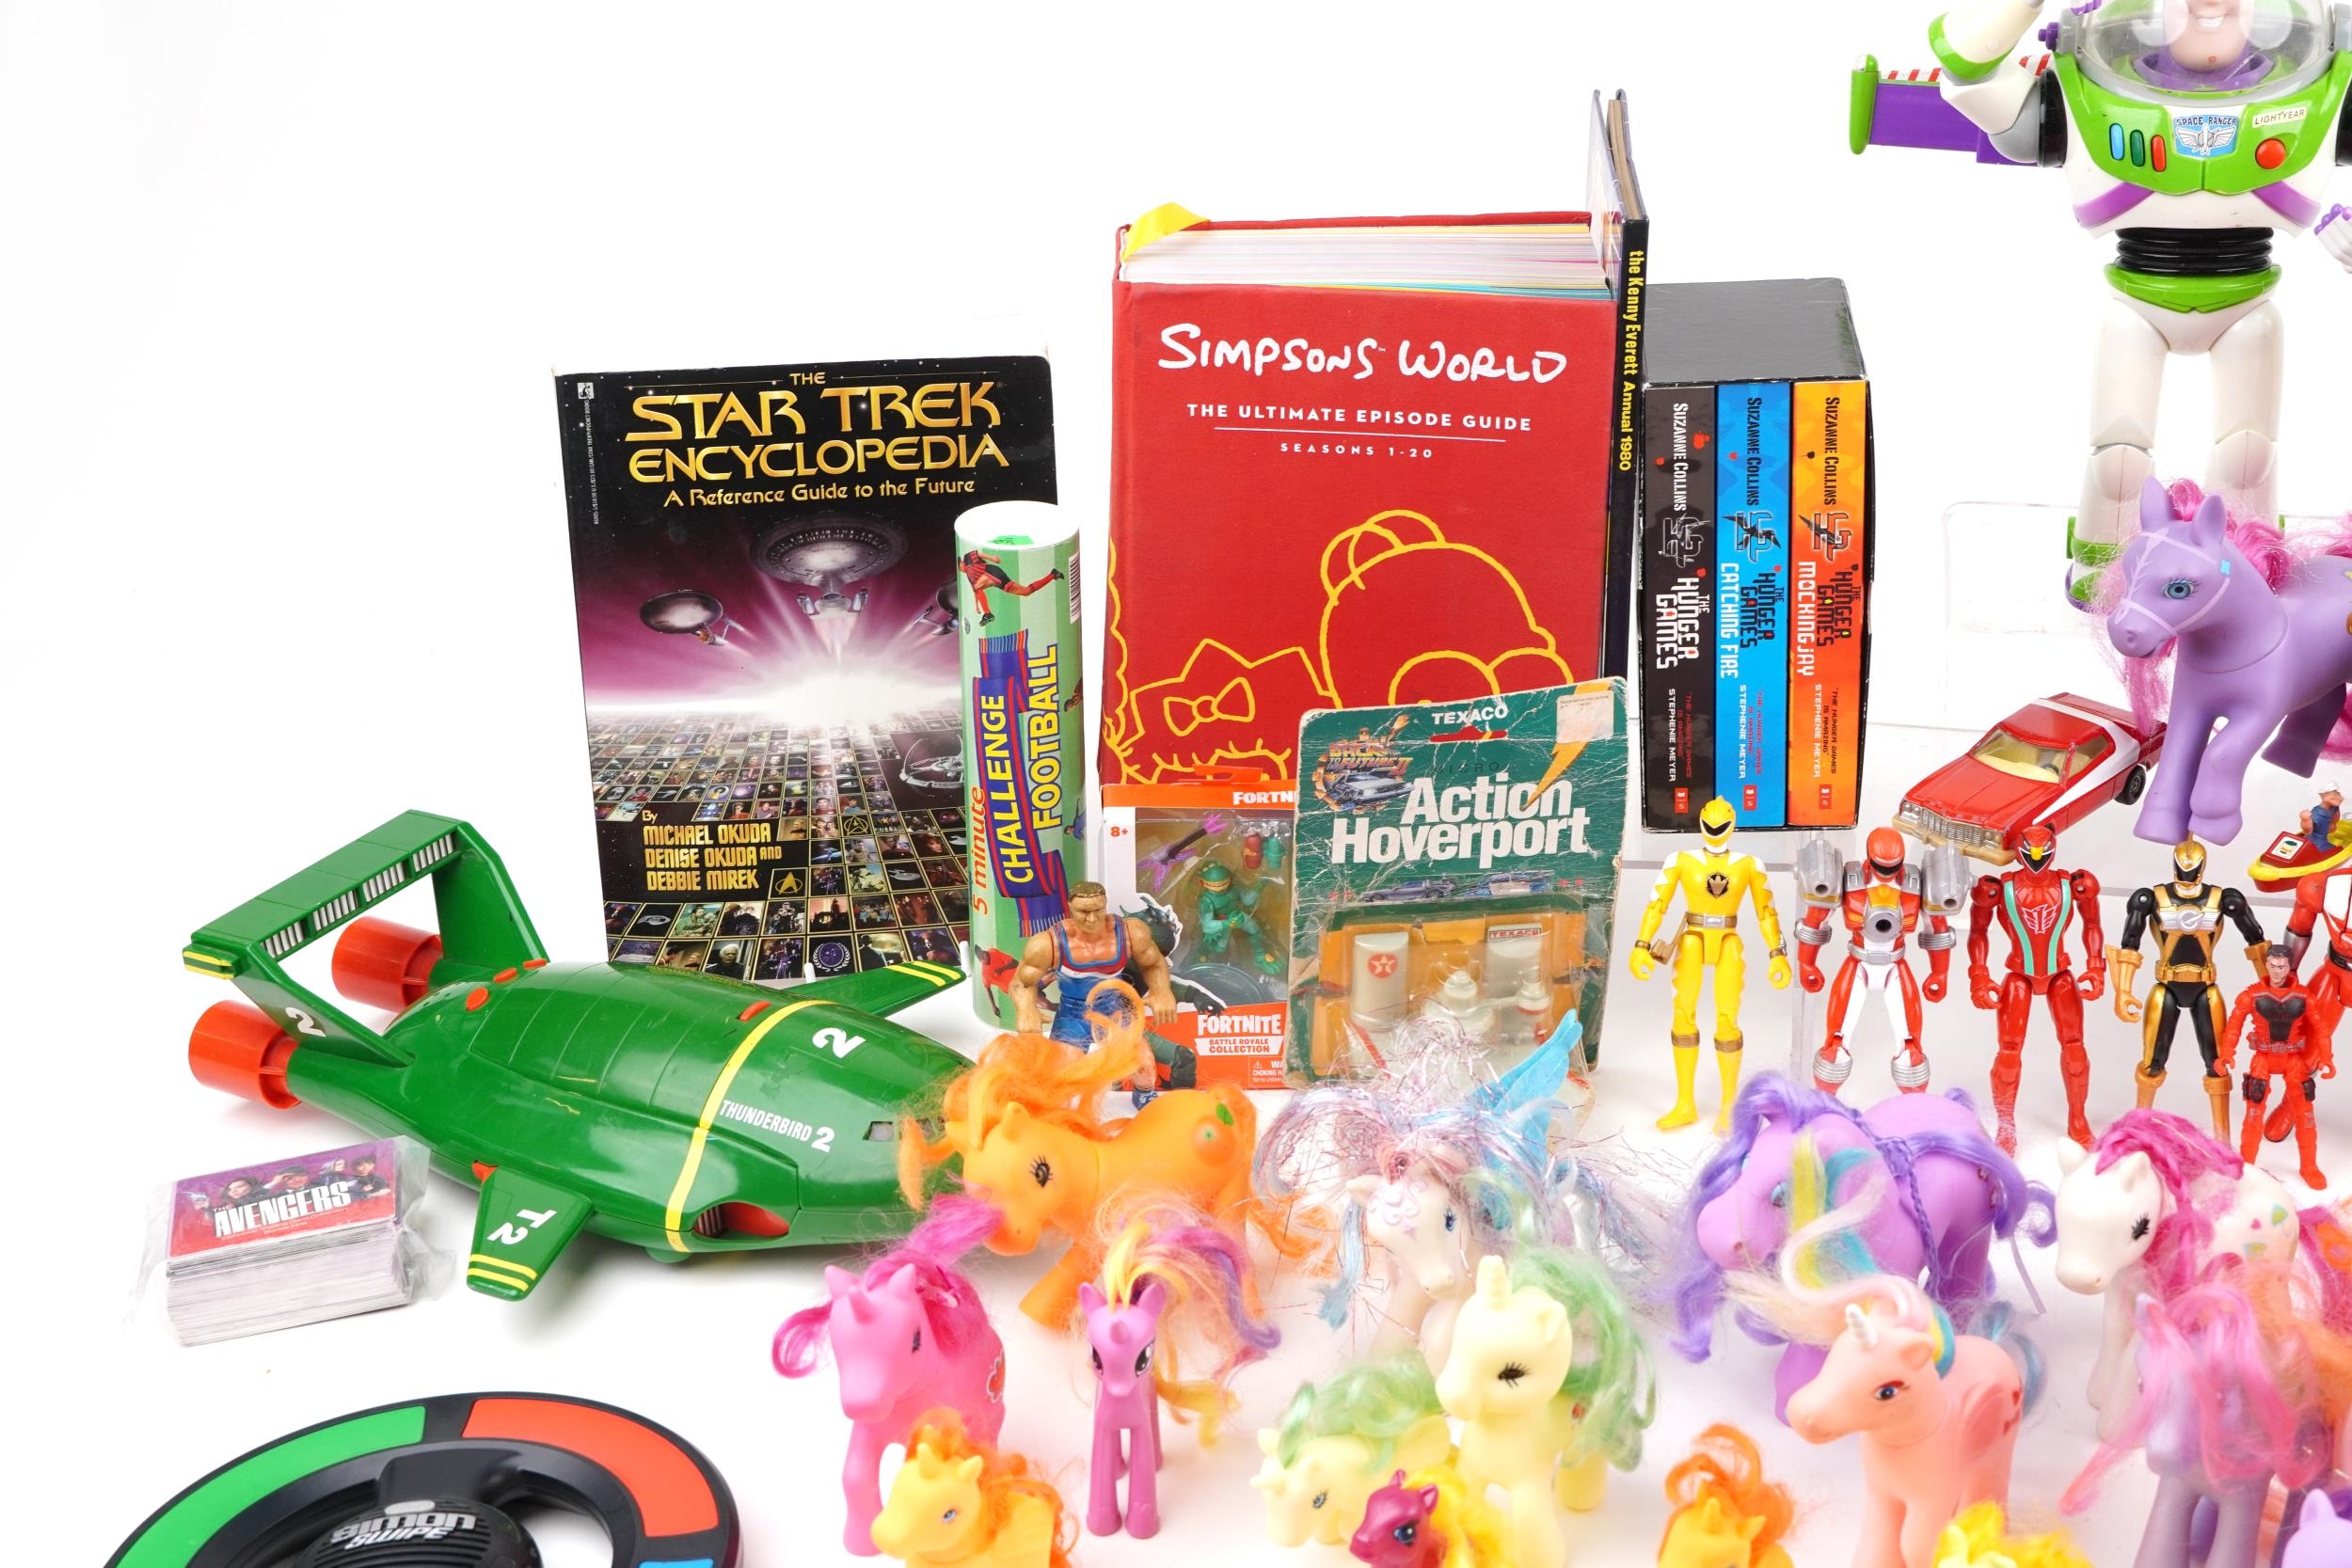 Vintage and later toys and related including My Little Ponies, Thunderbirds, Action Hover Port by - Image 2 of 6